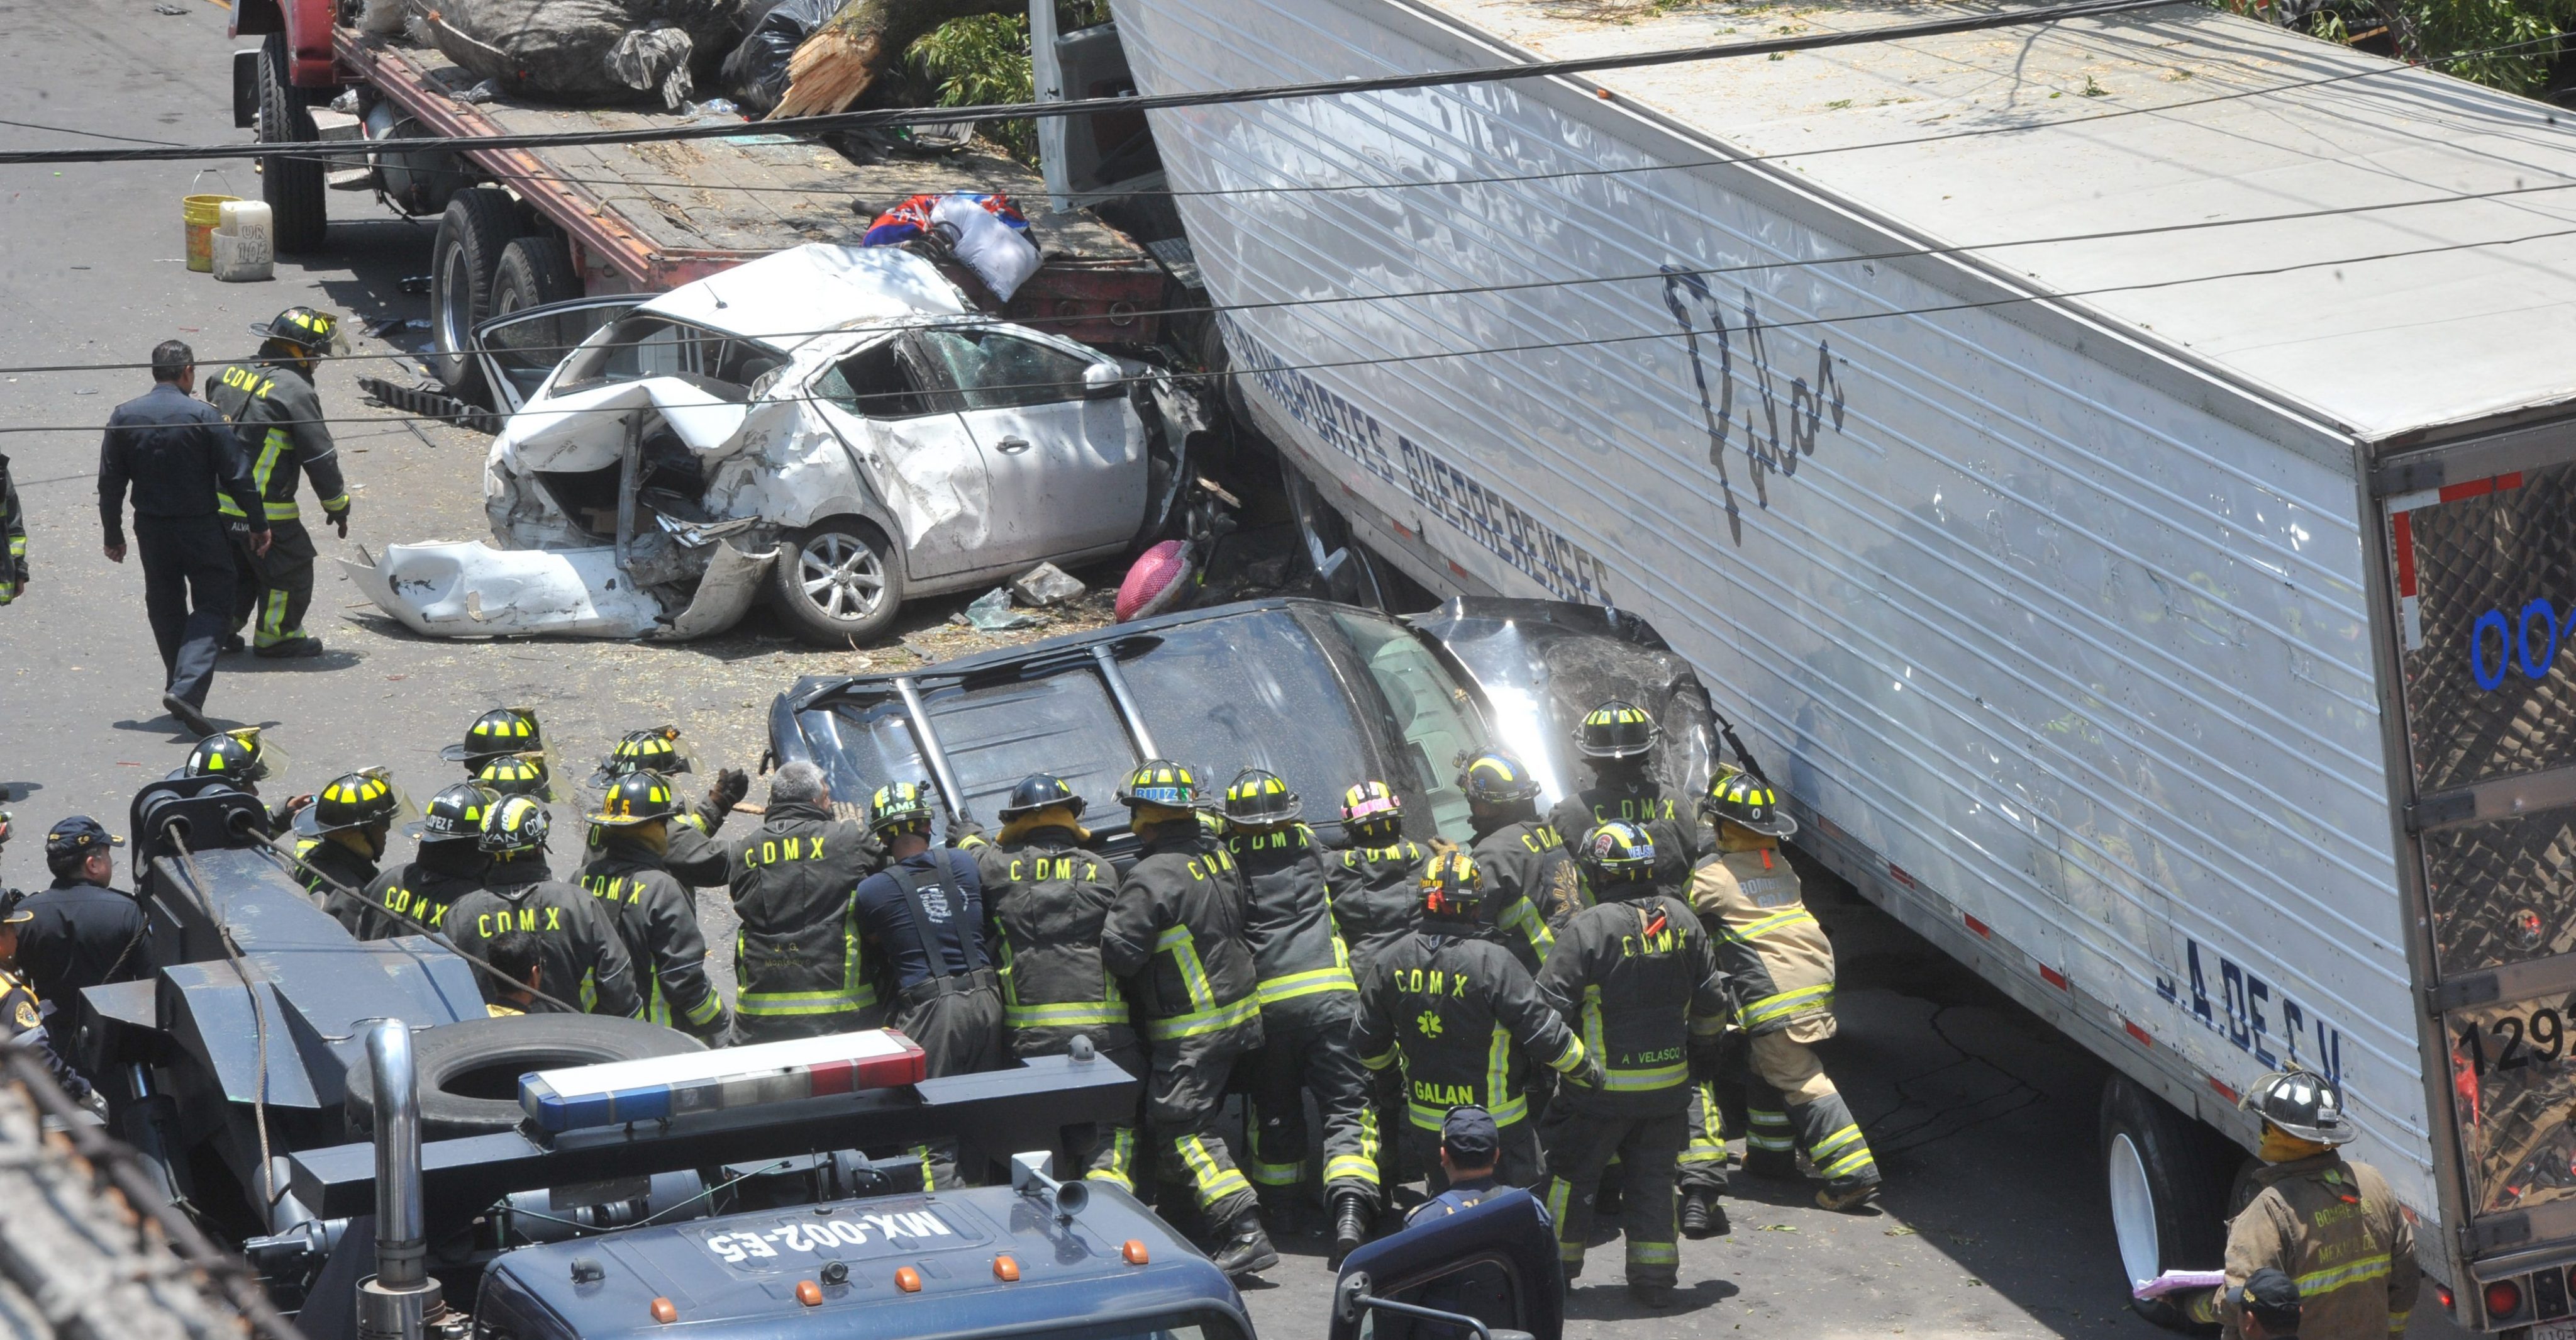 They add up to 4 people dead and 14 wounds after a trailer crash